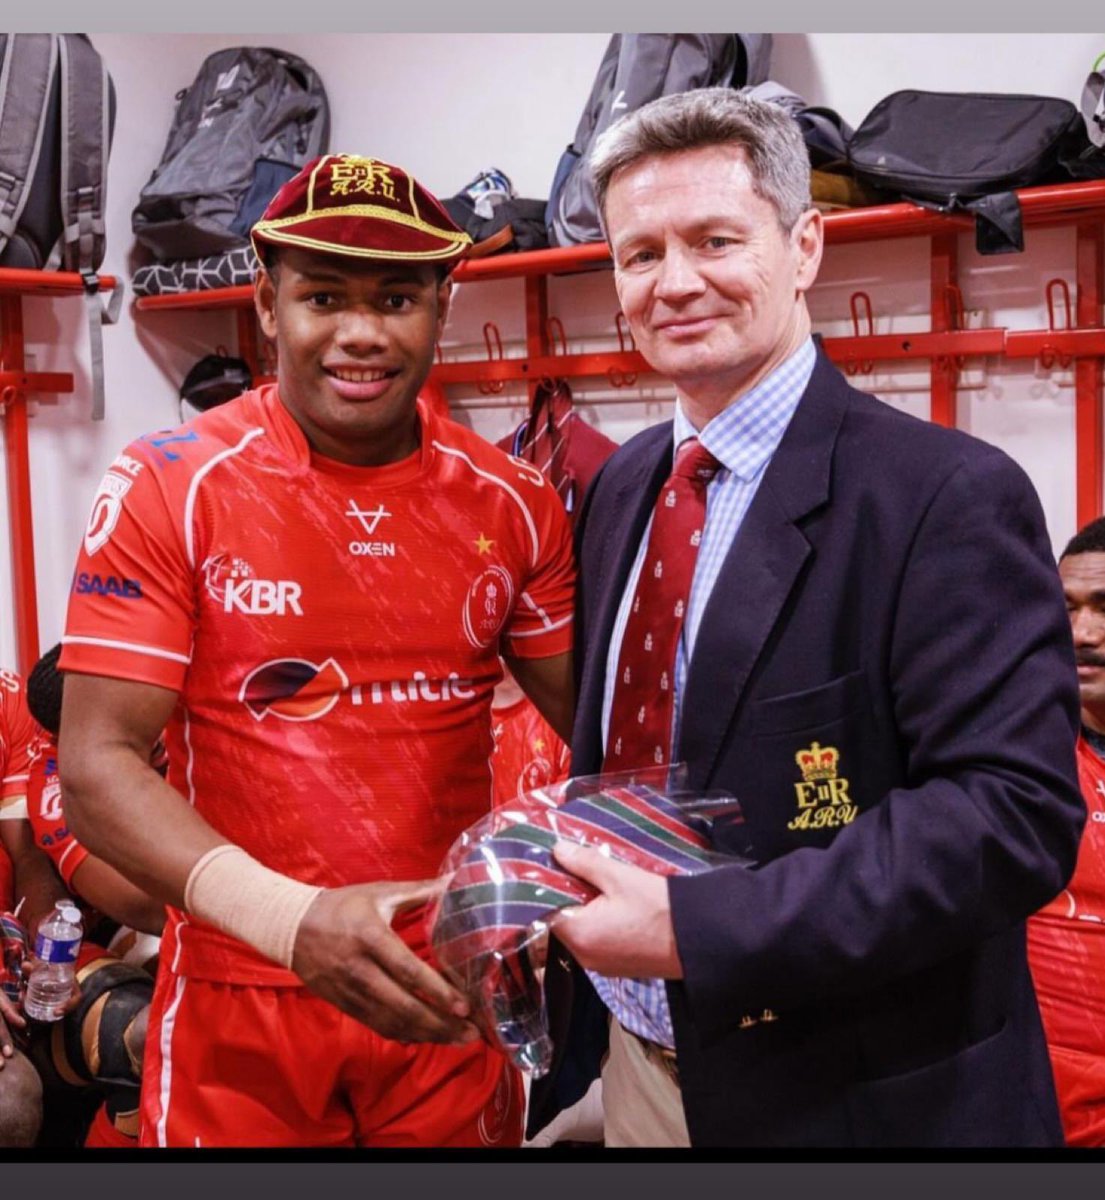 Principle 2: People are our priority. Massive congratulations to Pte Muritoki on receiving his first cap for the Army Men’s Senior Rugby Team!! @Cookie2148 @AlanFerrier4195 @ArmyinScotland @11SFABde